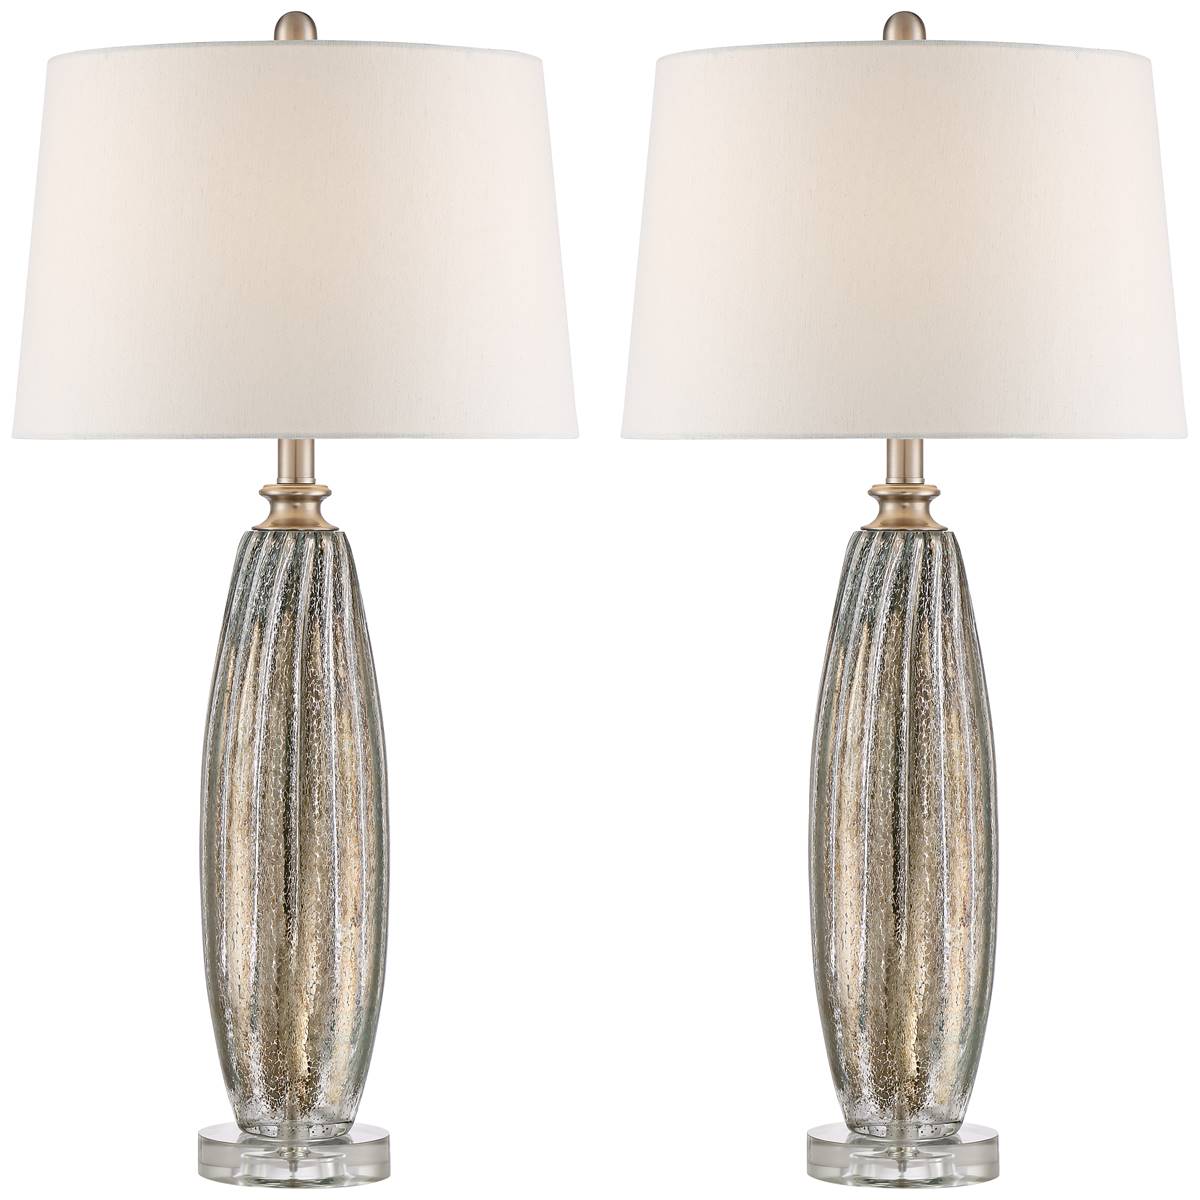 Pacific Coast Lighting Set Of 2 Suri Champagne Table Lamps